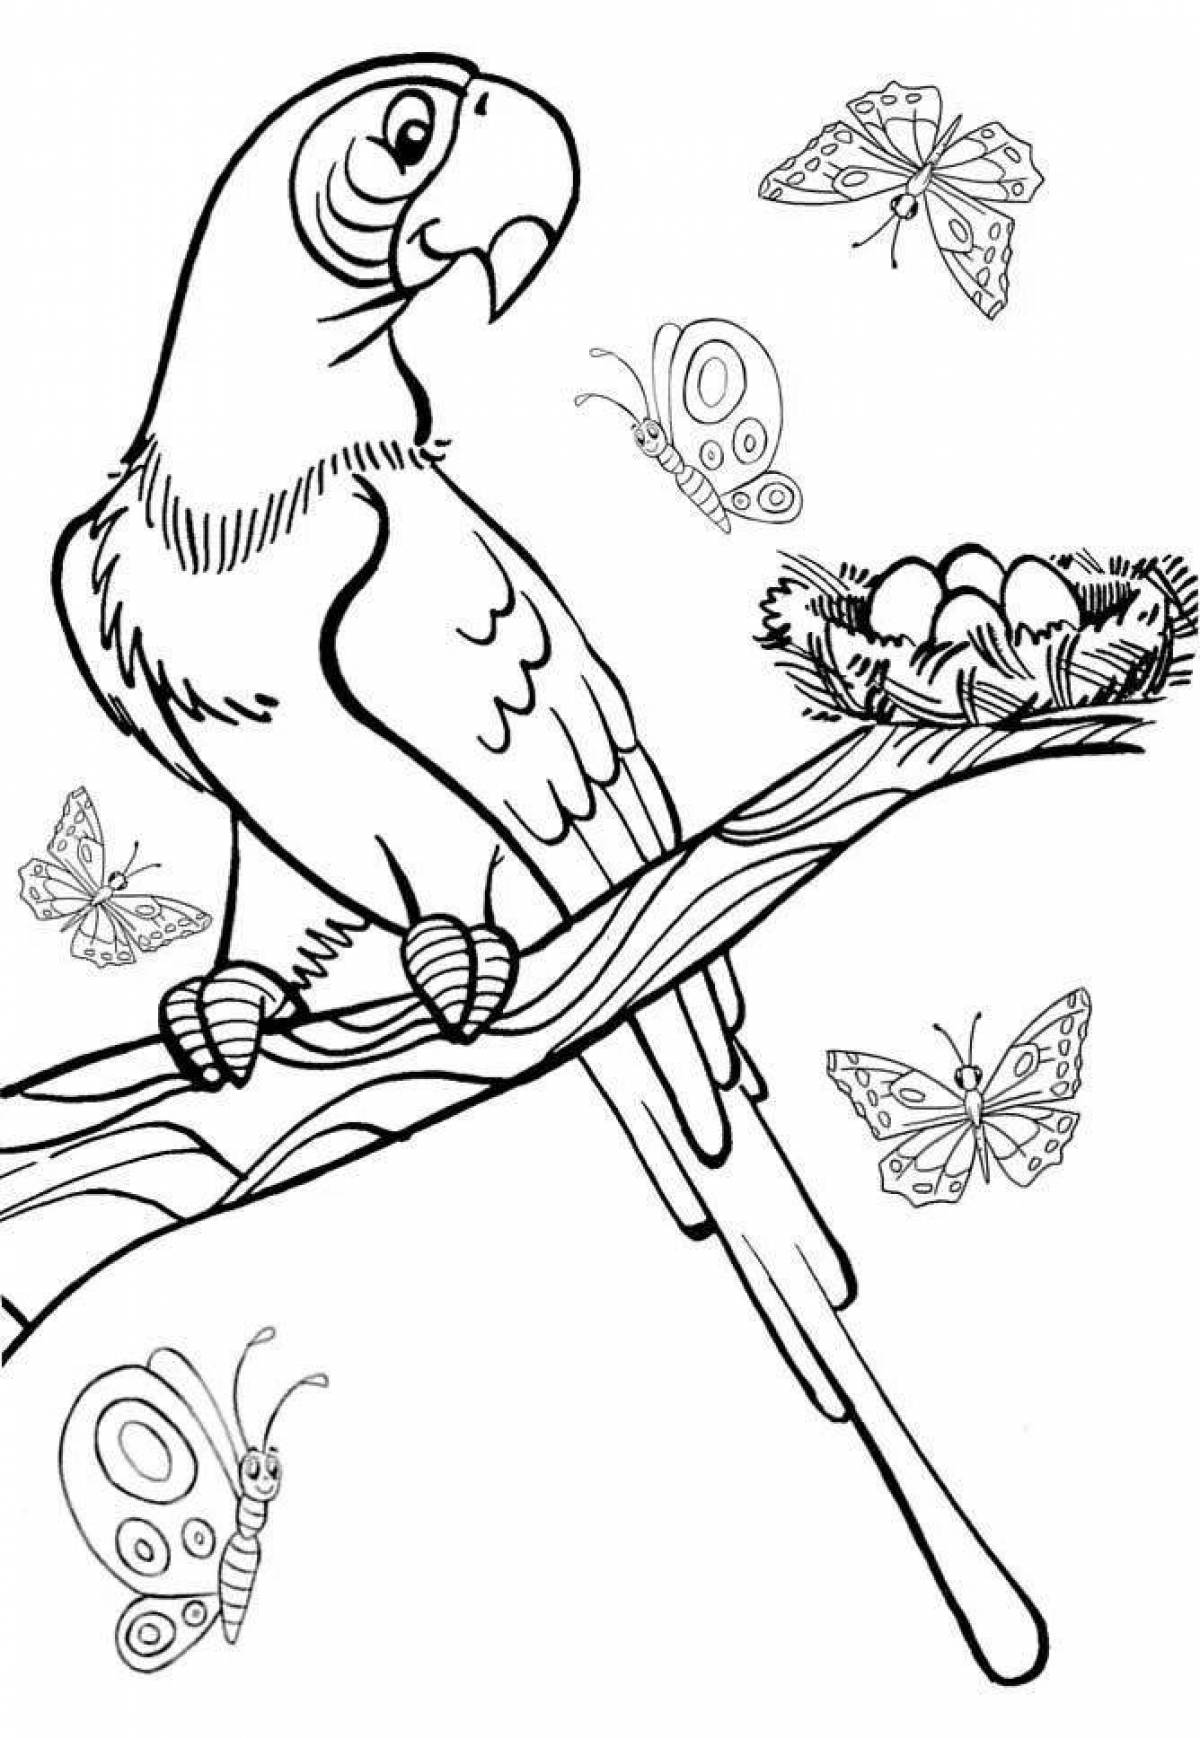 Cute parrot coloring pages for kids